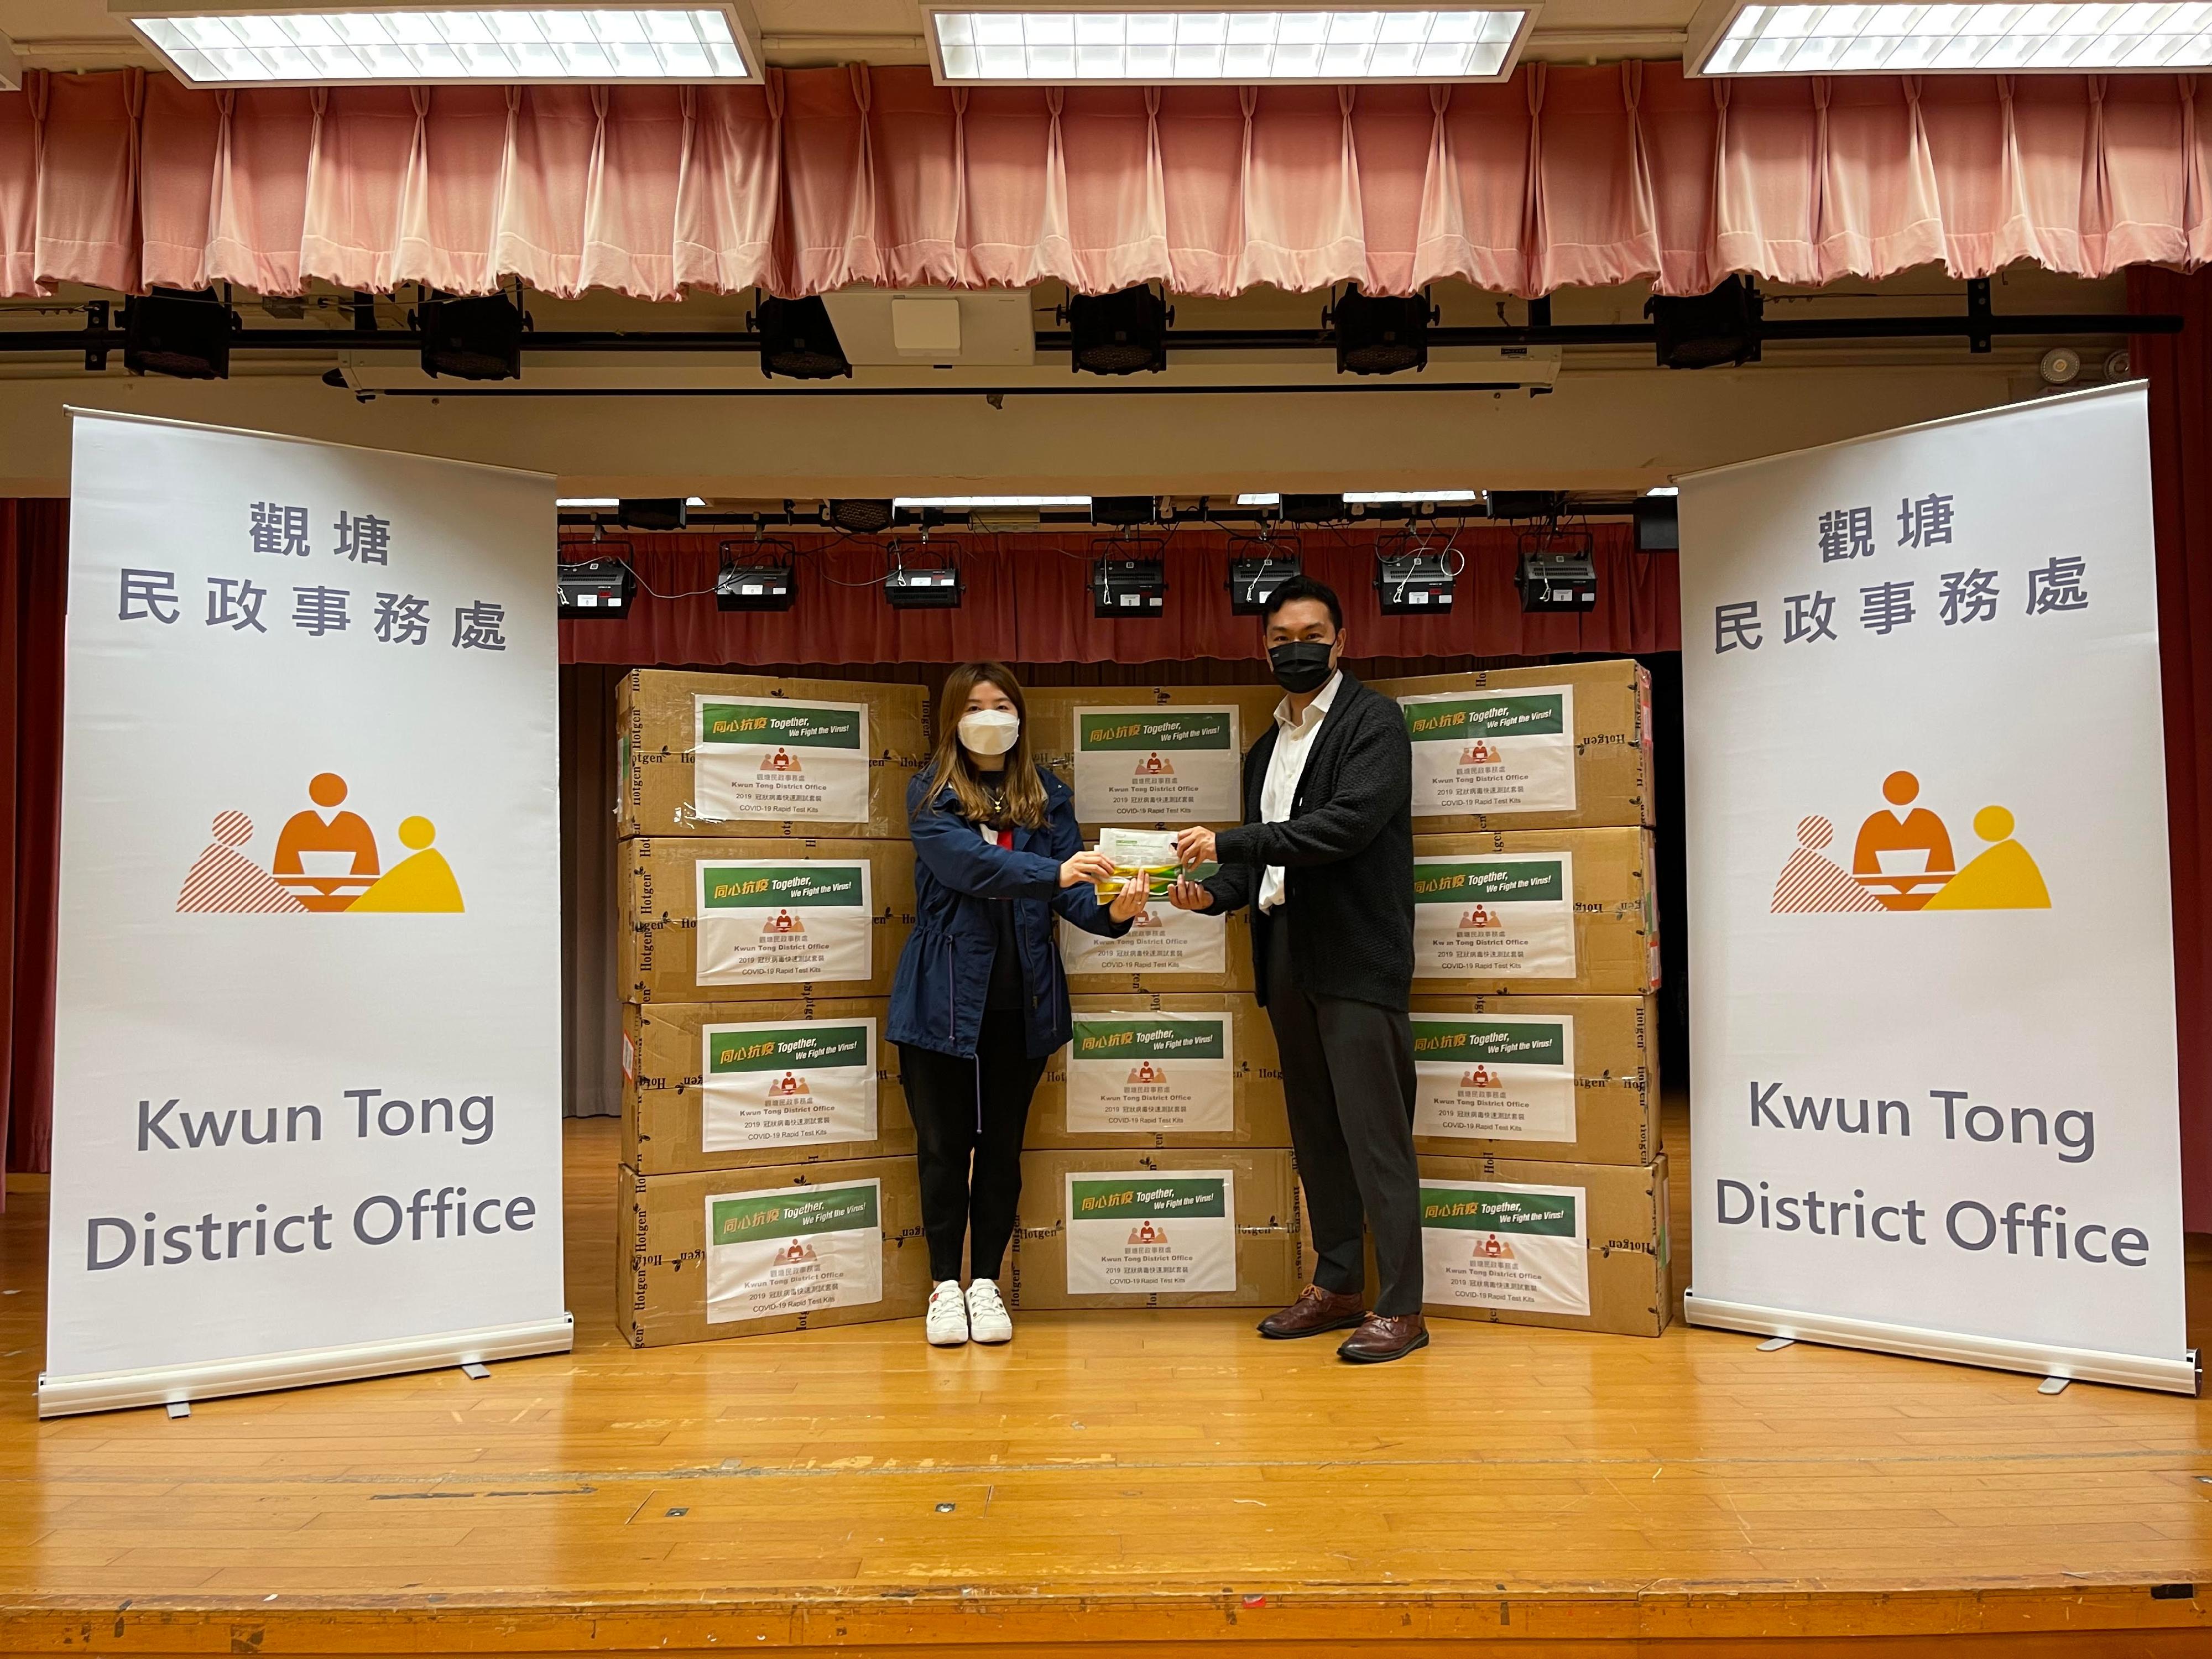 The Kwun Tong District Office today (March 26) distributed COVID-19 rapid test kits to households, cleansing workers and property management staff living and working in Kai Tin Tower for voluntary testing through the property management company.